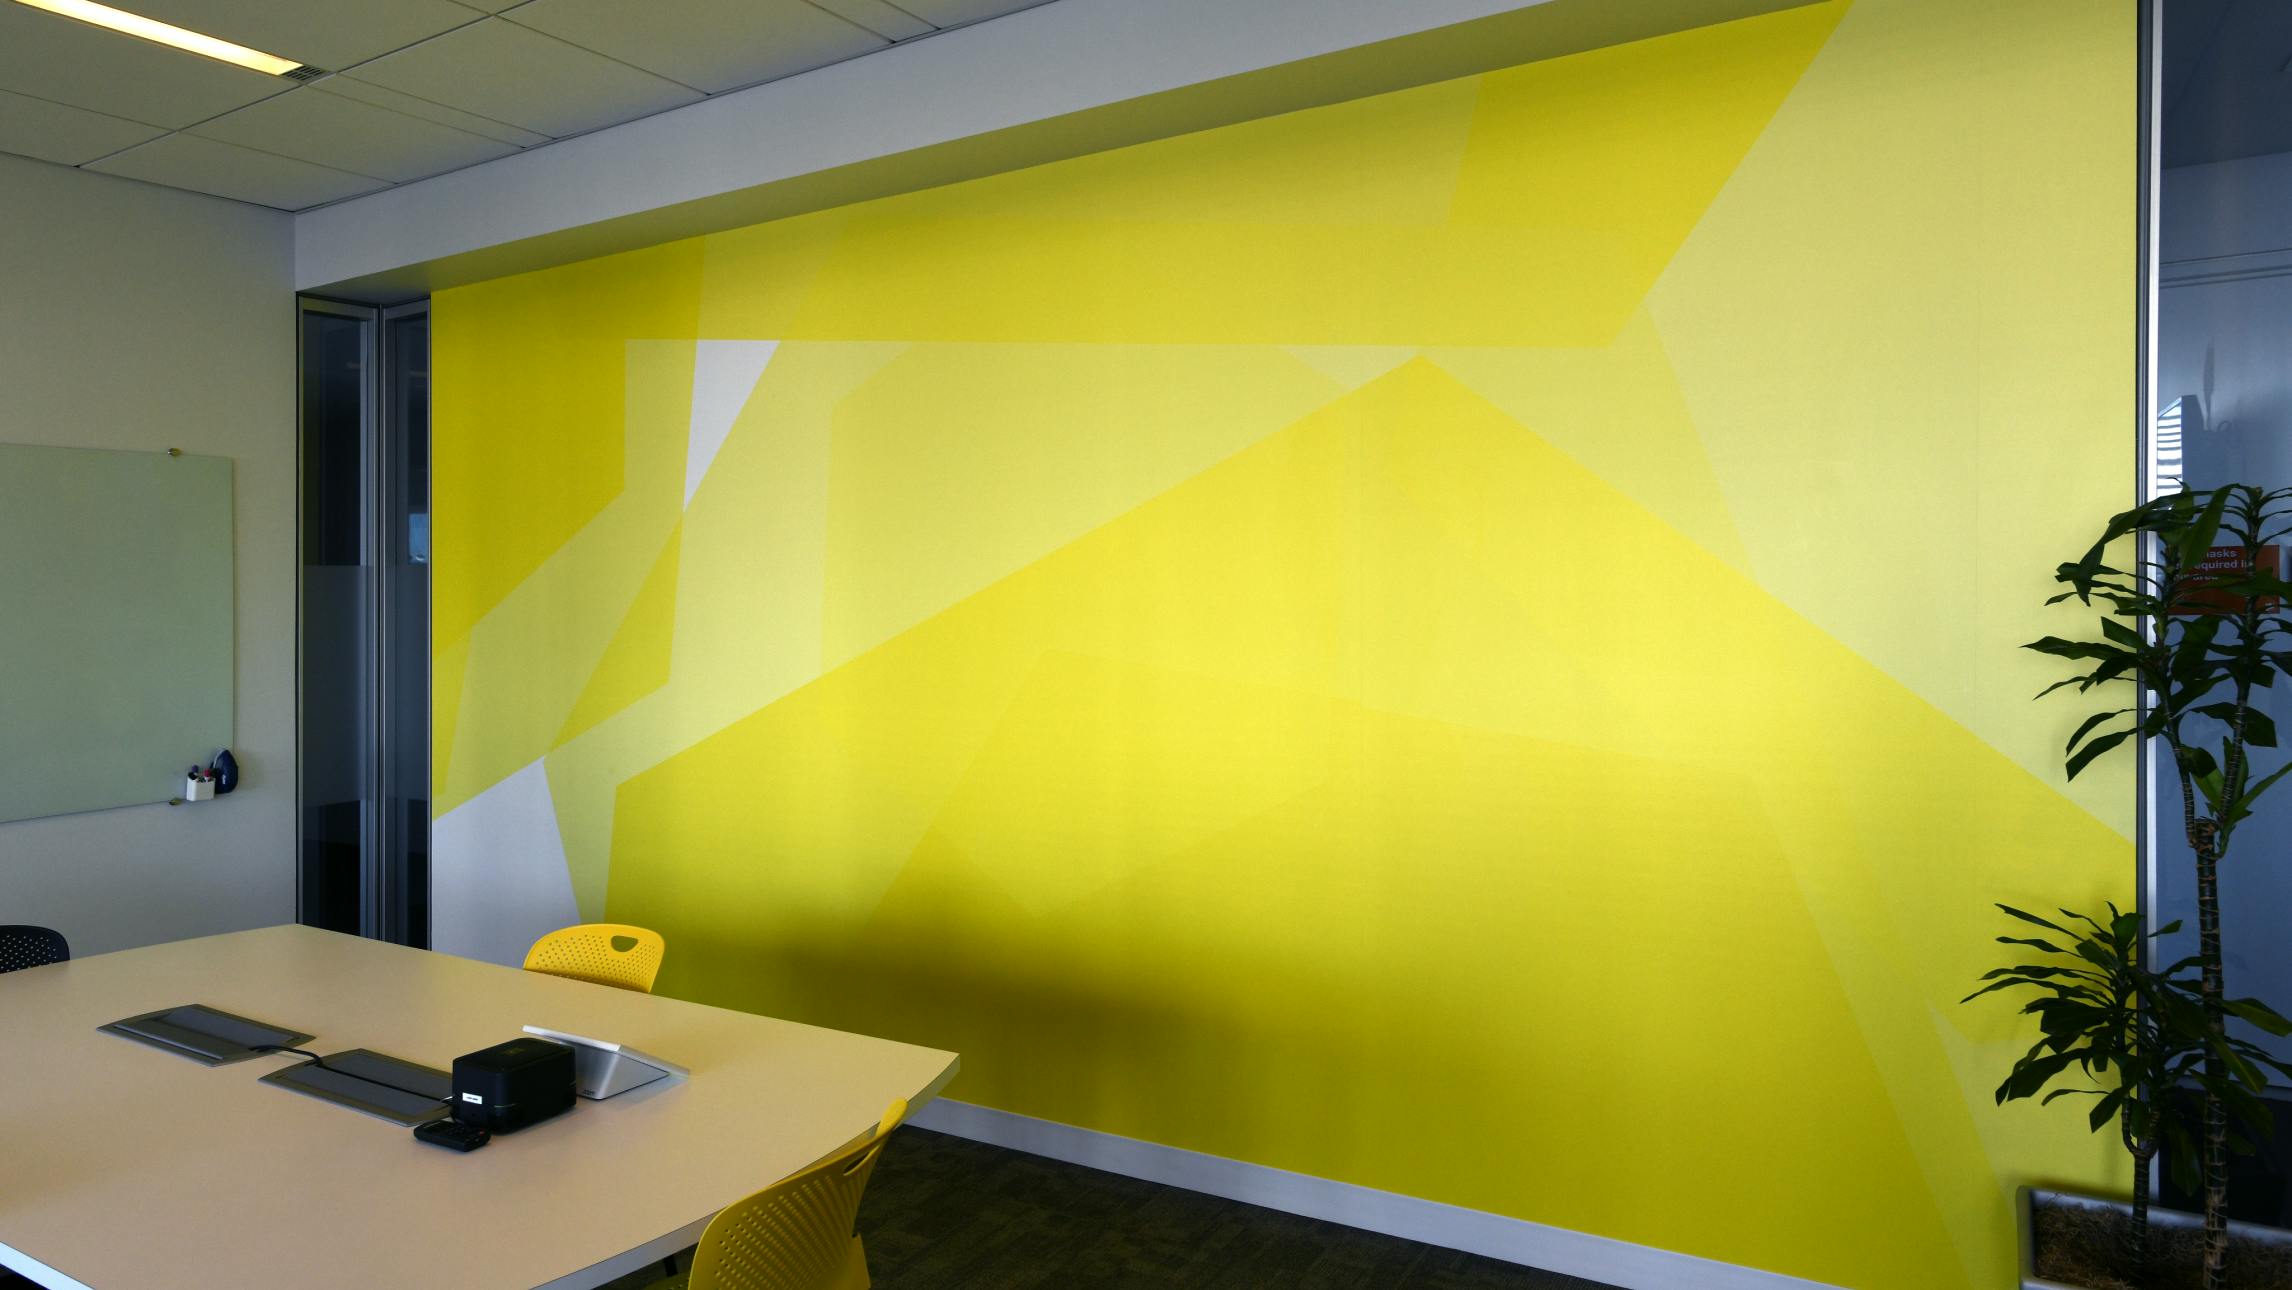 A photograph of the inside of a Datadog conference room- the focal point being a wall with custom wallpaper. The wallpaper is monochramatic and yellow and comprised of oversized hexagons layered at varying angles.